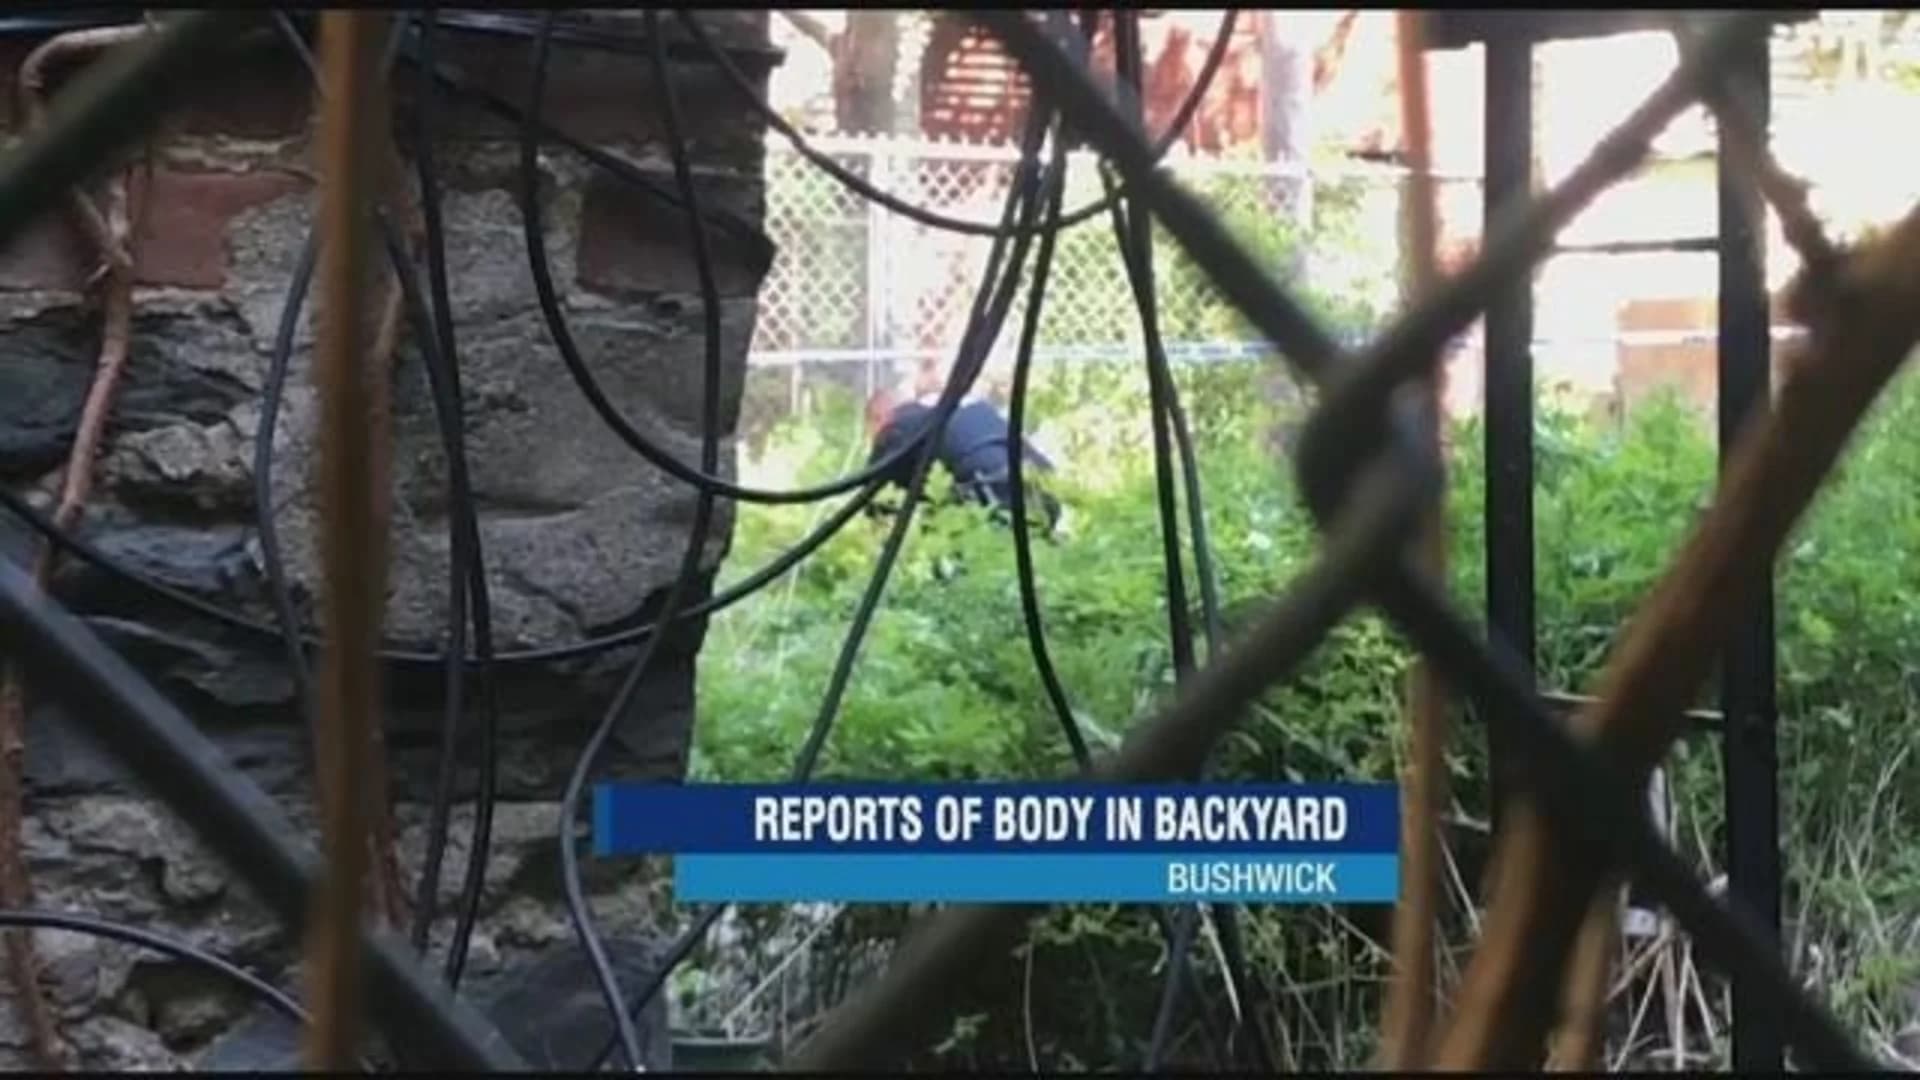 Police sources: Remains found in Bushwick backyard